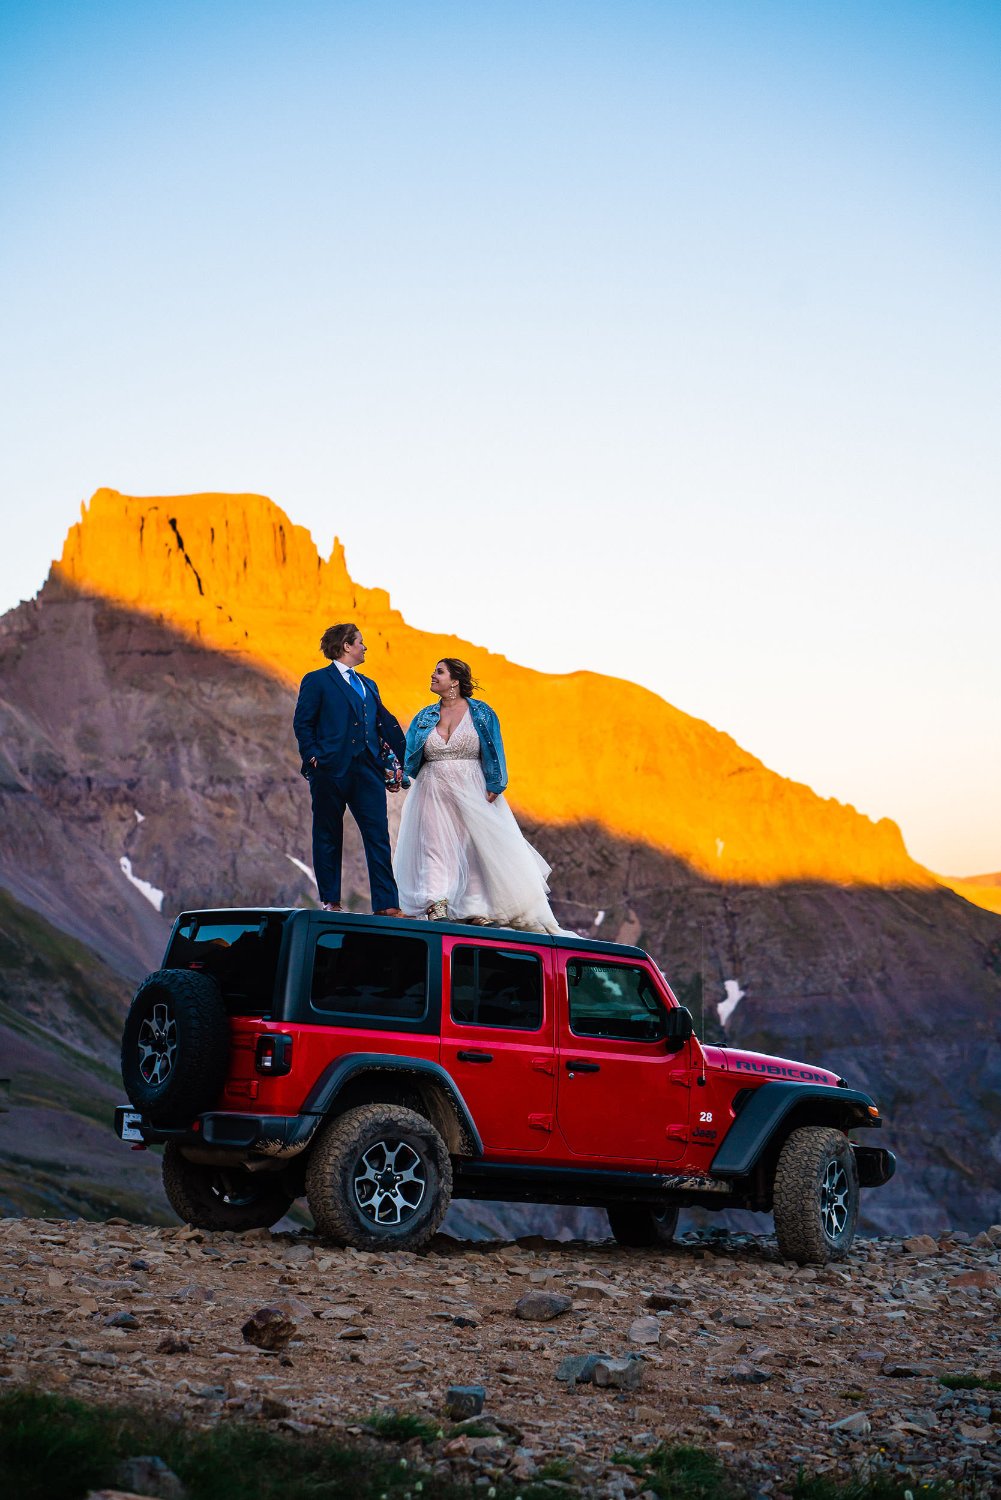 Elopement photos of a bride and groom standing on top of a jeep.